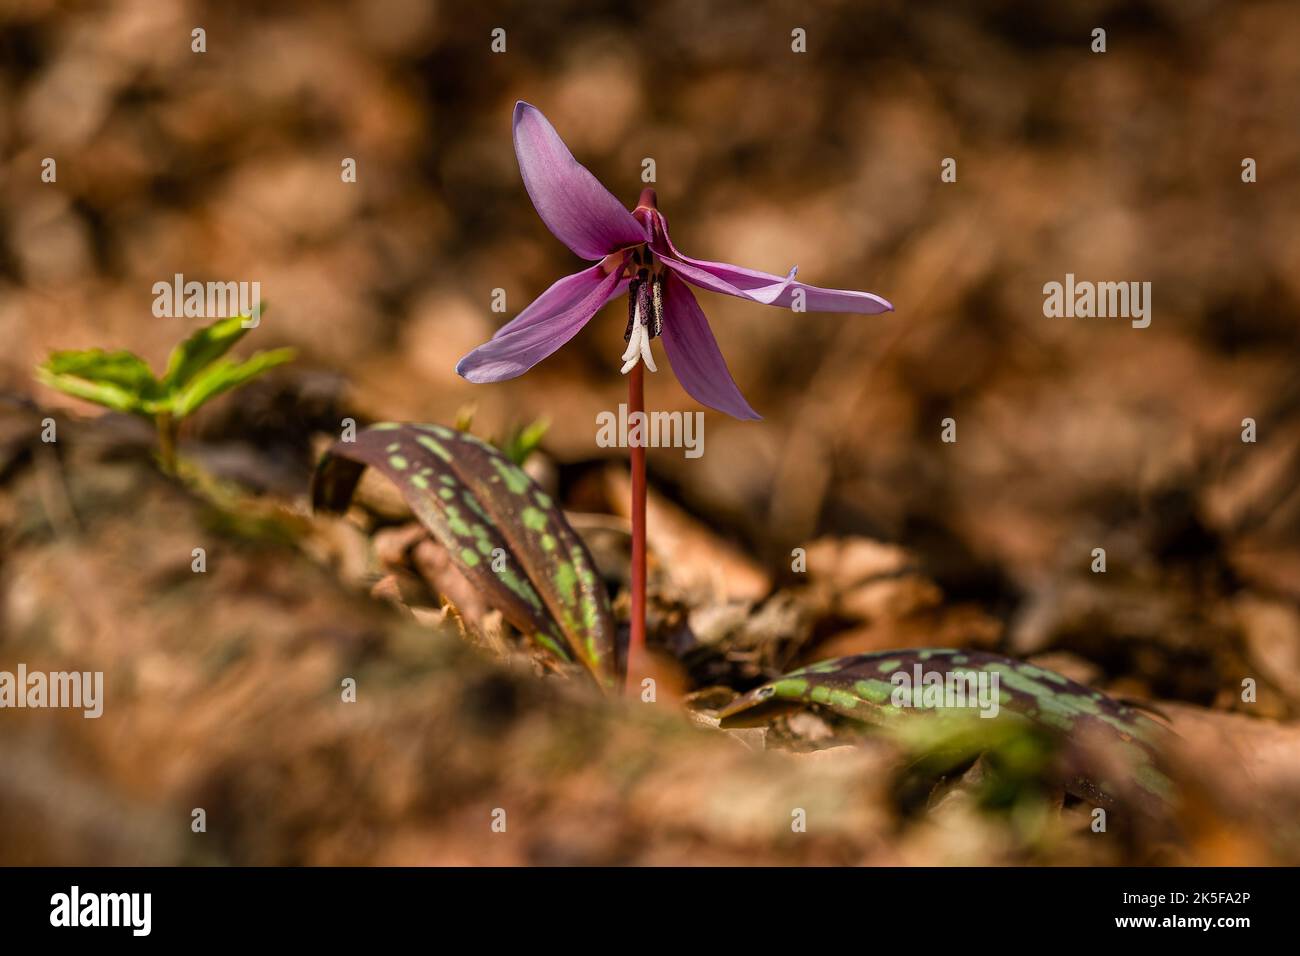 The fragile spring flower, the dogtooth violet, or a dens-canis, growing in the forest with dry leaves on the ground. Blurry brown background. Stock Photo